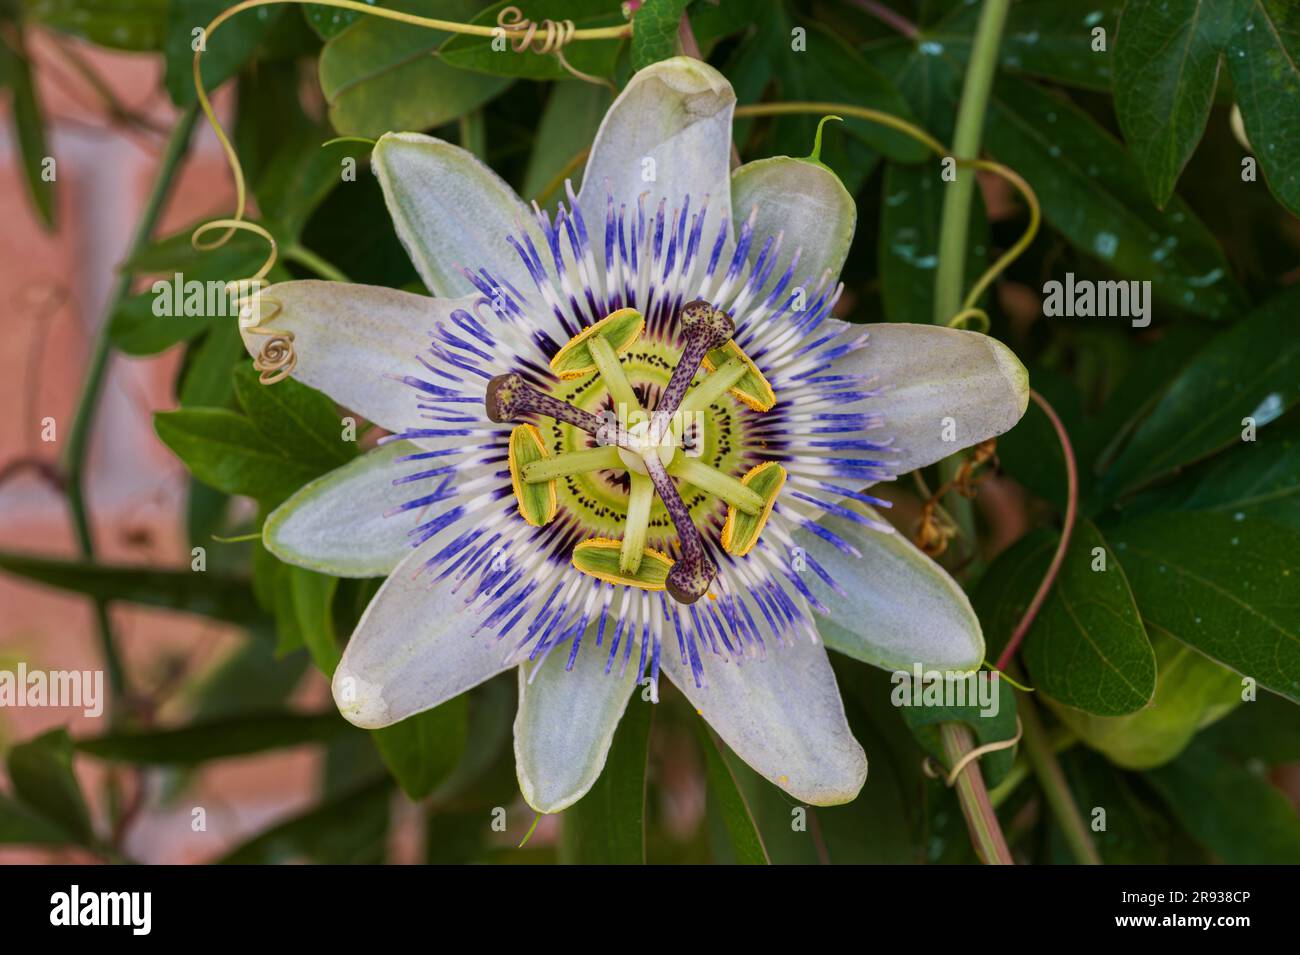 Passiflora L. is a genus of plants of the Passifloraceae family which includes over 570 species of perennial and annual herbaceous plants, shrubs with Stock Photo